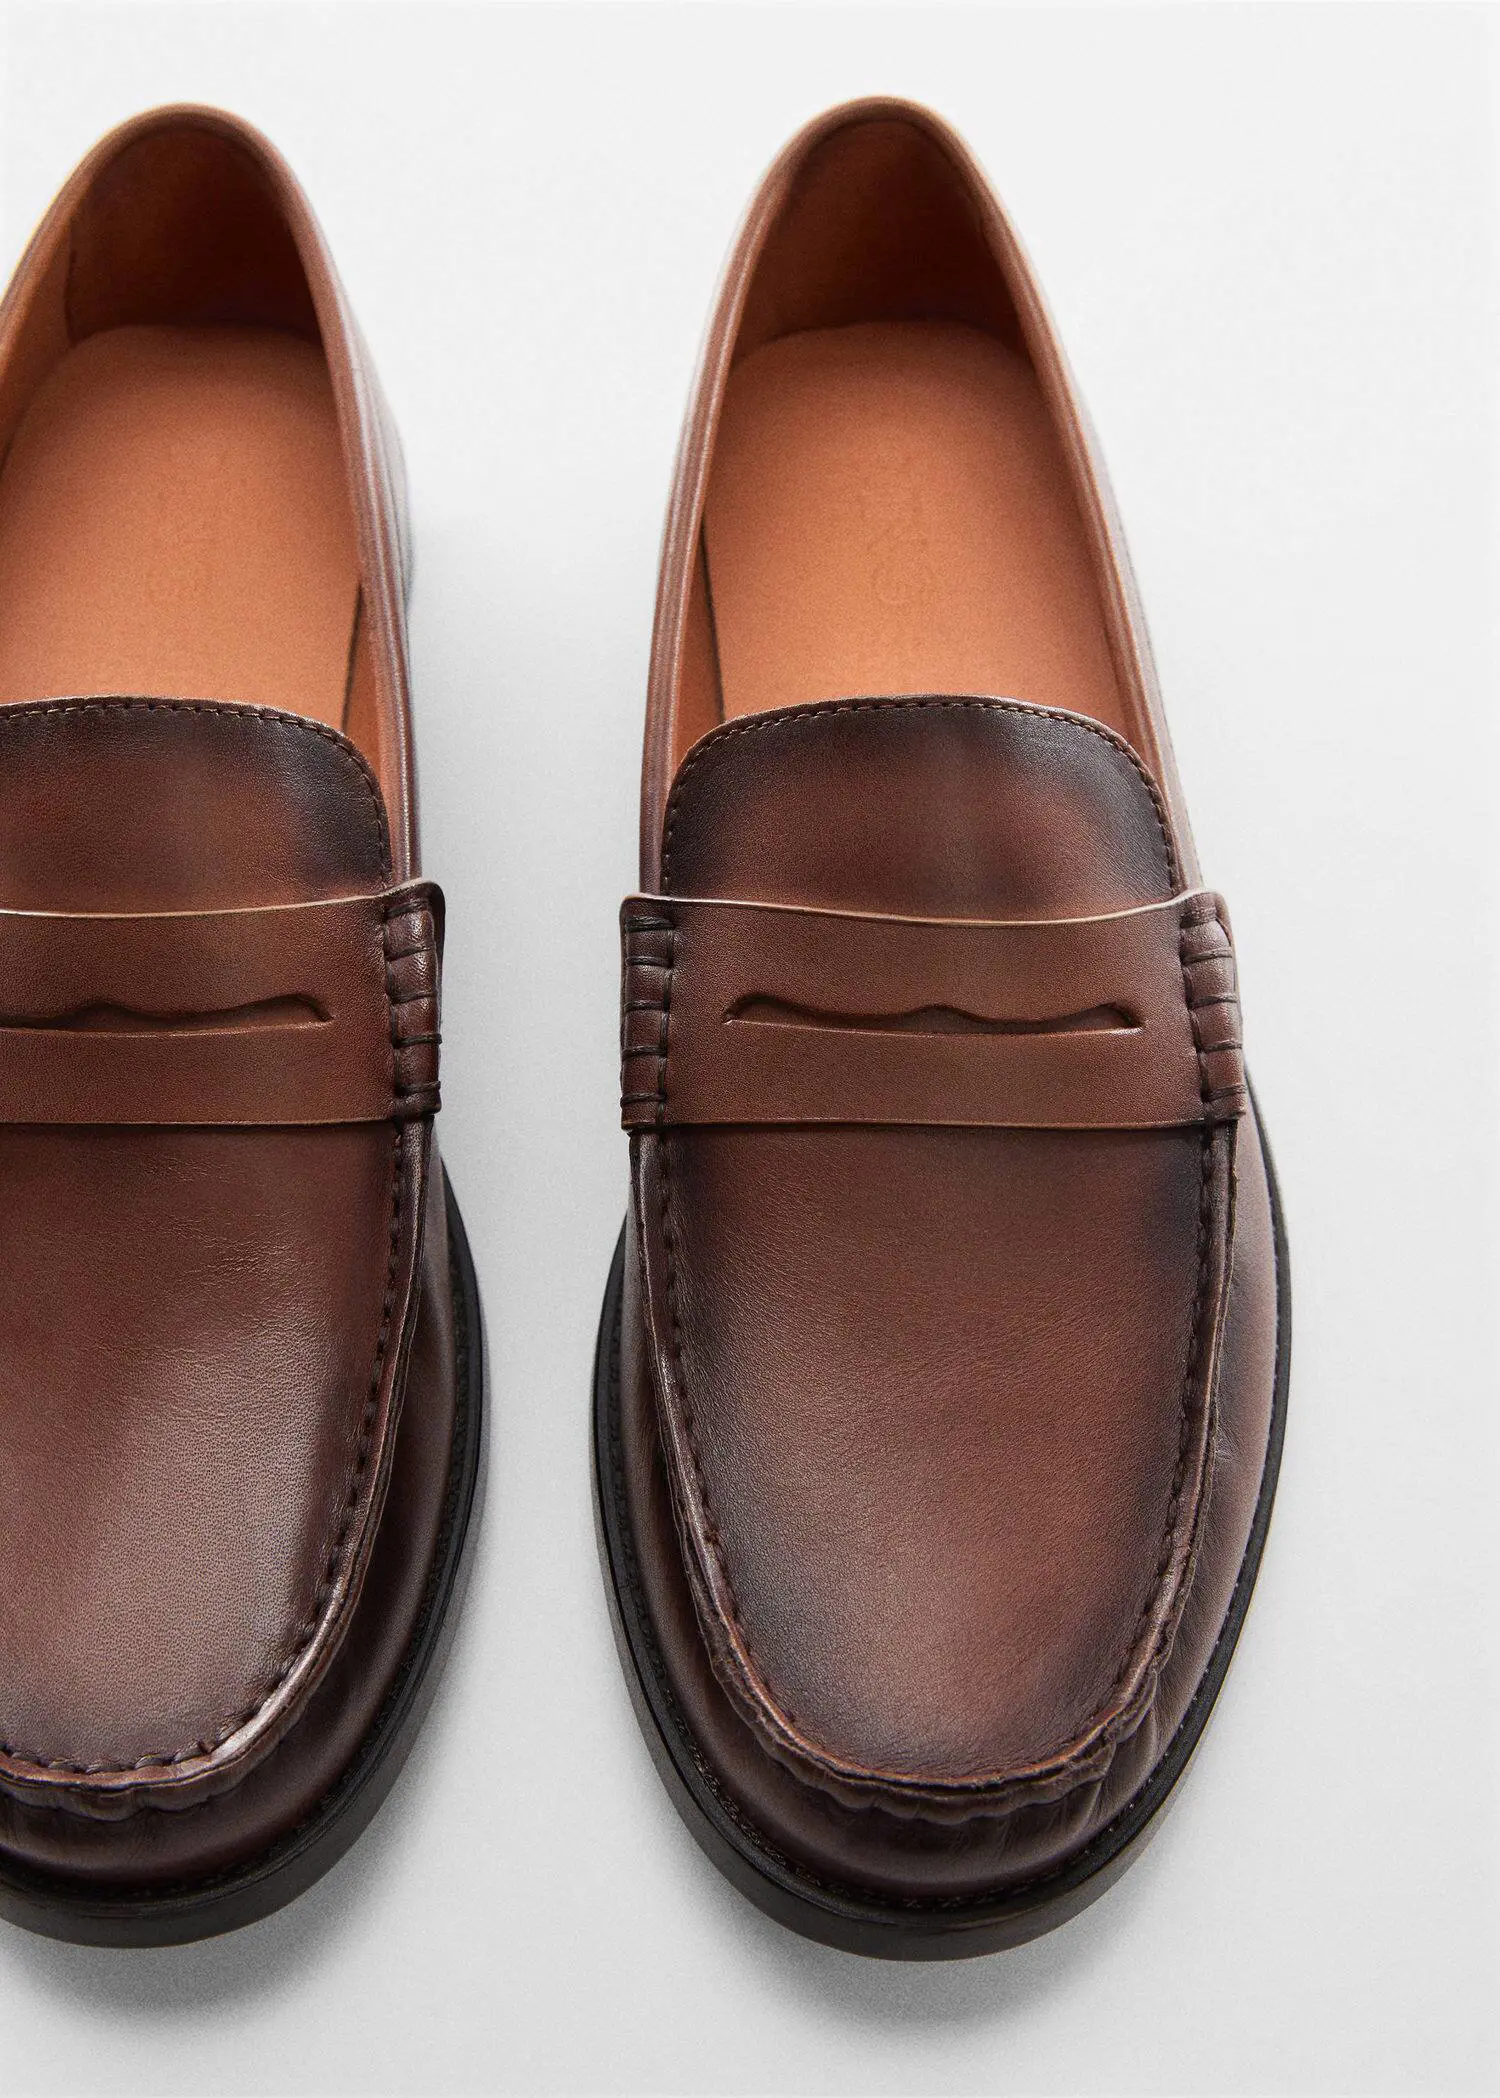 Mango Leather penny loafers. a close up of a pair of brown loafers. 